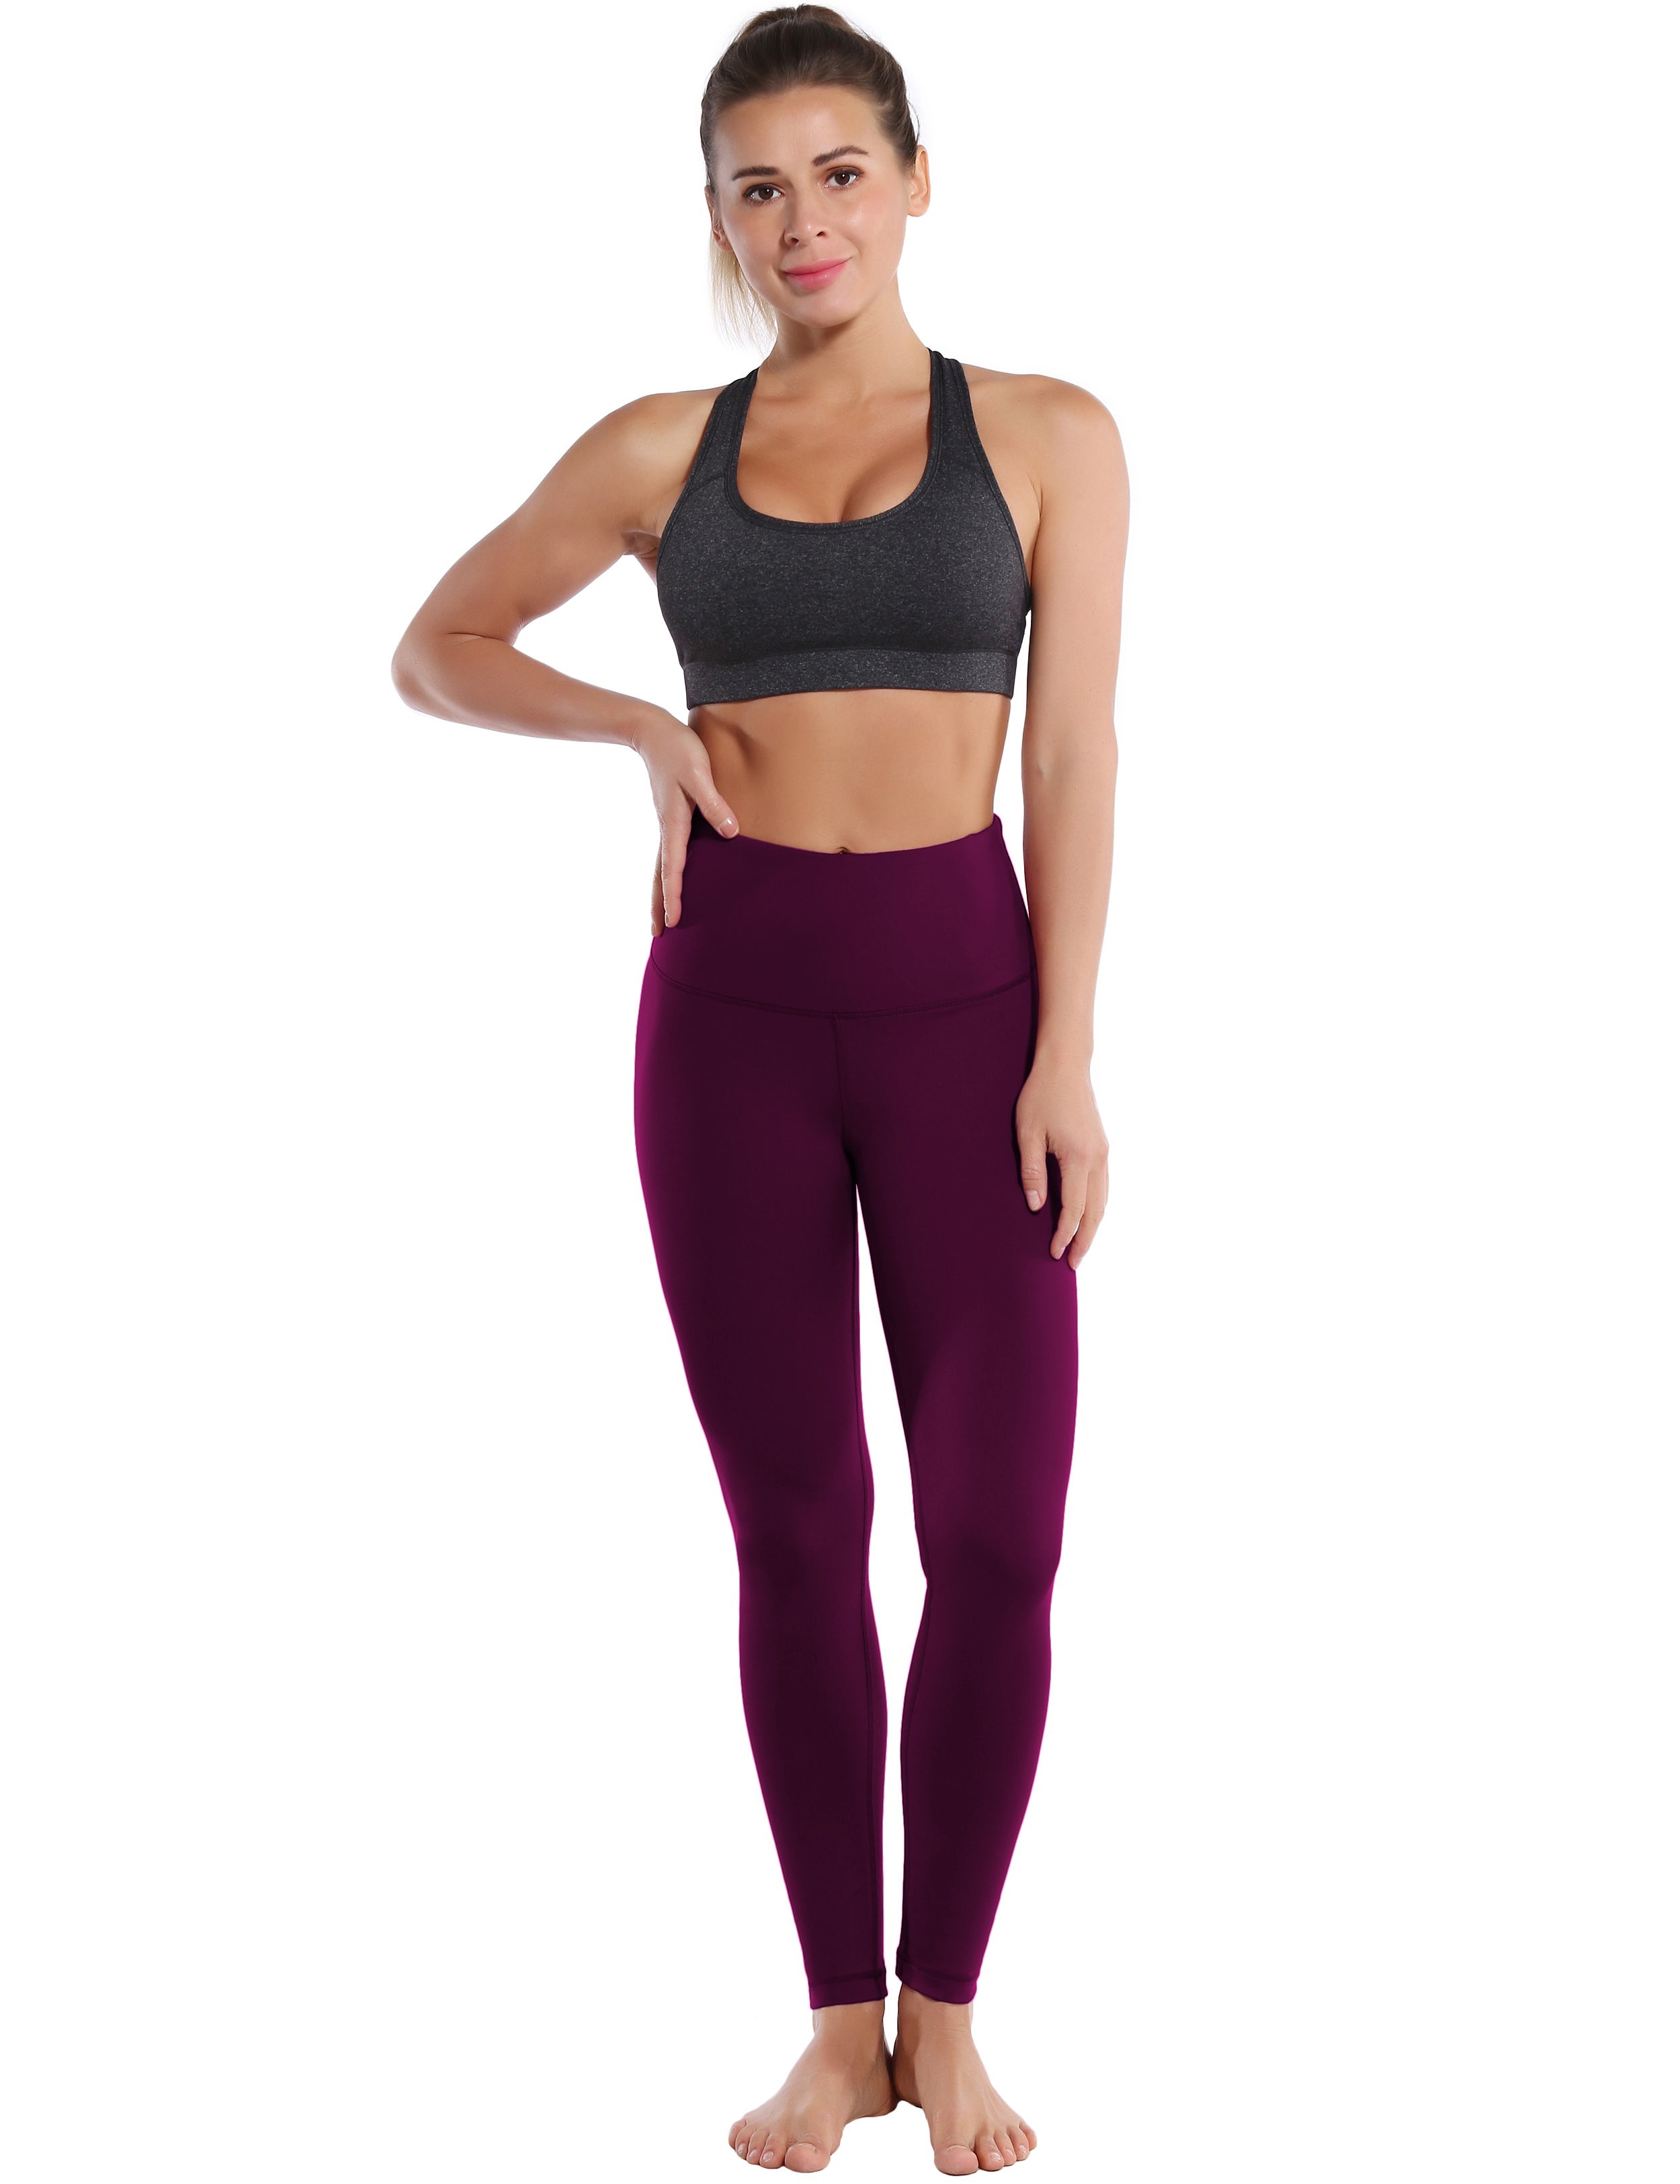 High Waist Golf Pants grapevine 75%Nylon/25%Spandex Fabric doesn't attract lint easily 4-way stretch No see-through Moisture-wicking Tummy control Inner pocket Four lengths